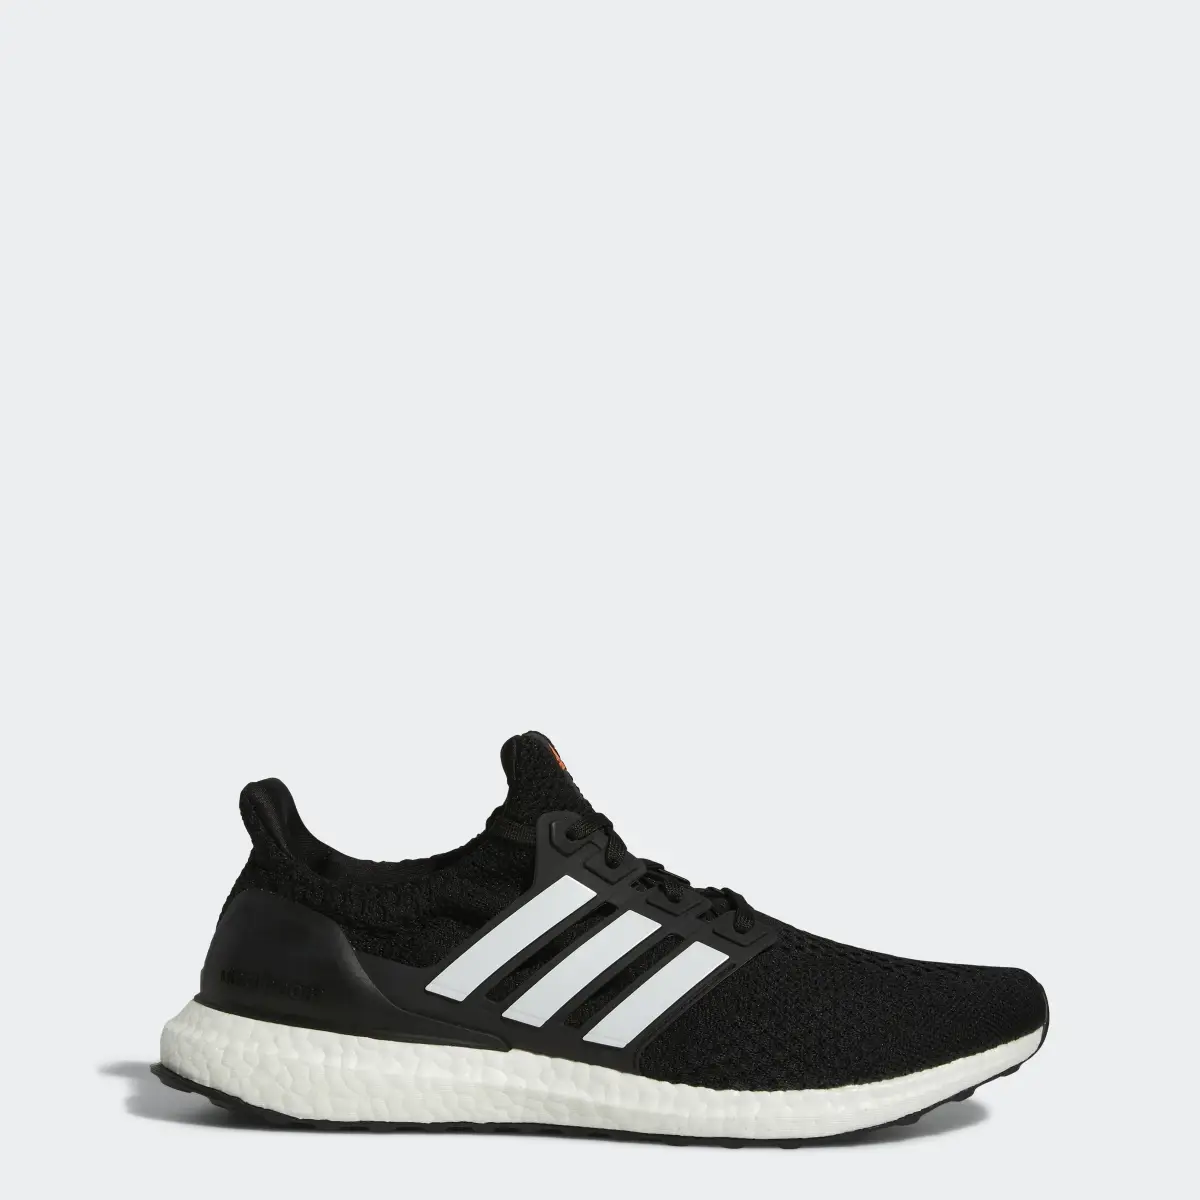 Adidas Ultraboost 5.0 DNA Shoes. 1